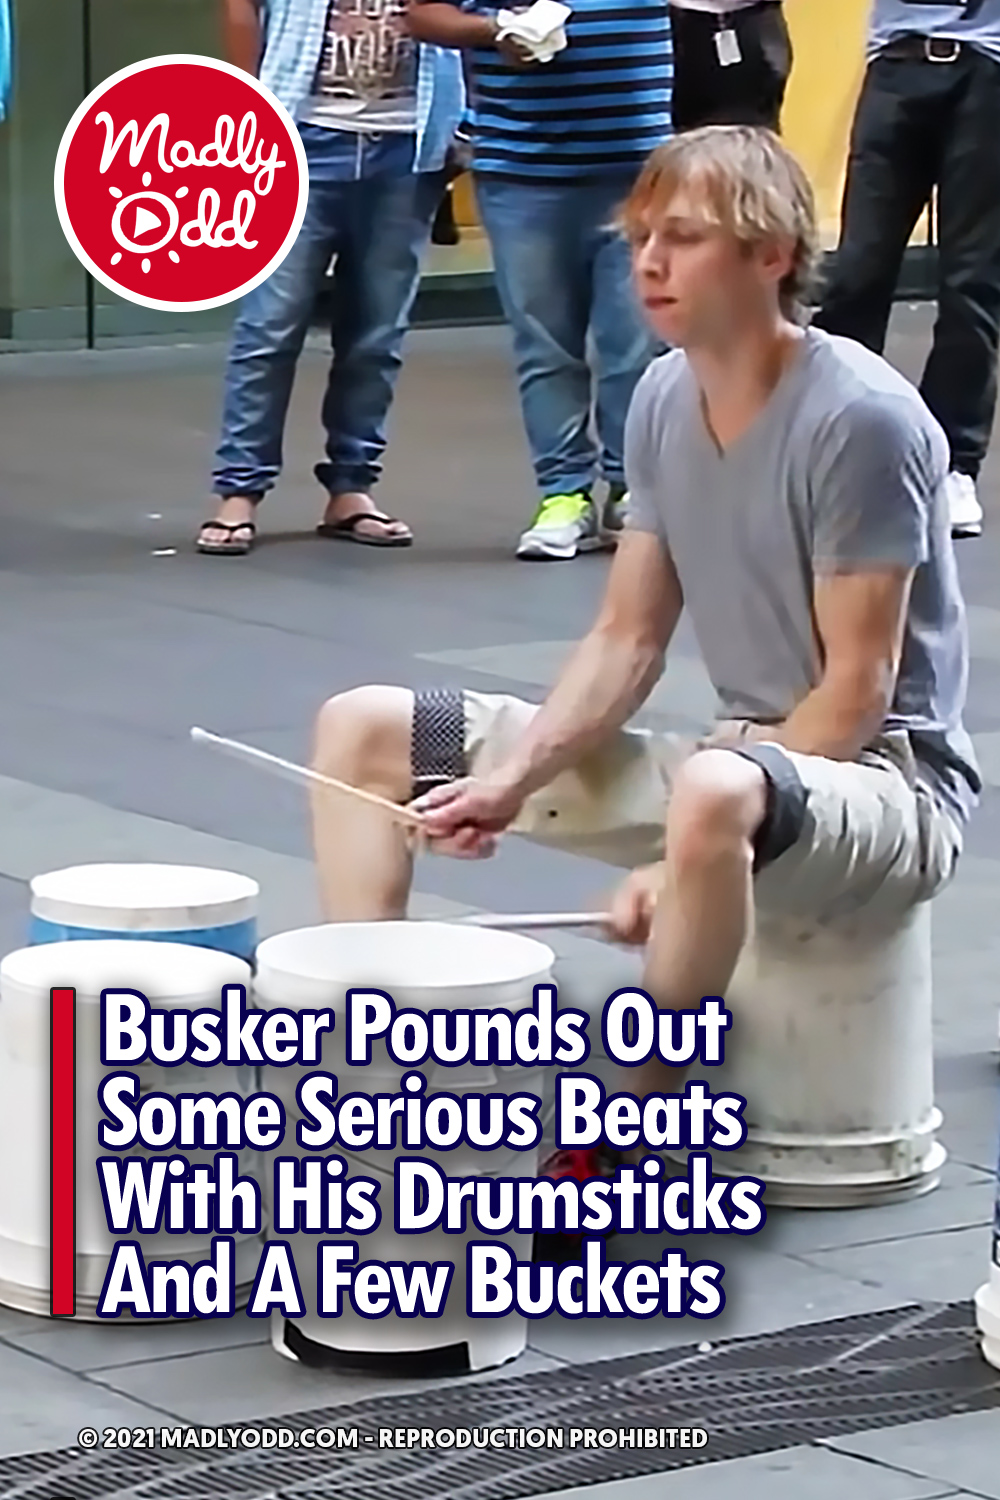 Busker Pounds Out Some Serious Beats With His Drumsticks And A Few Buckets